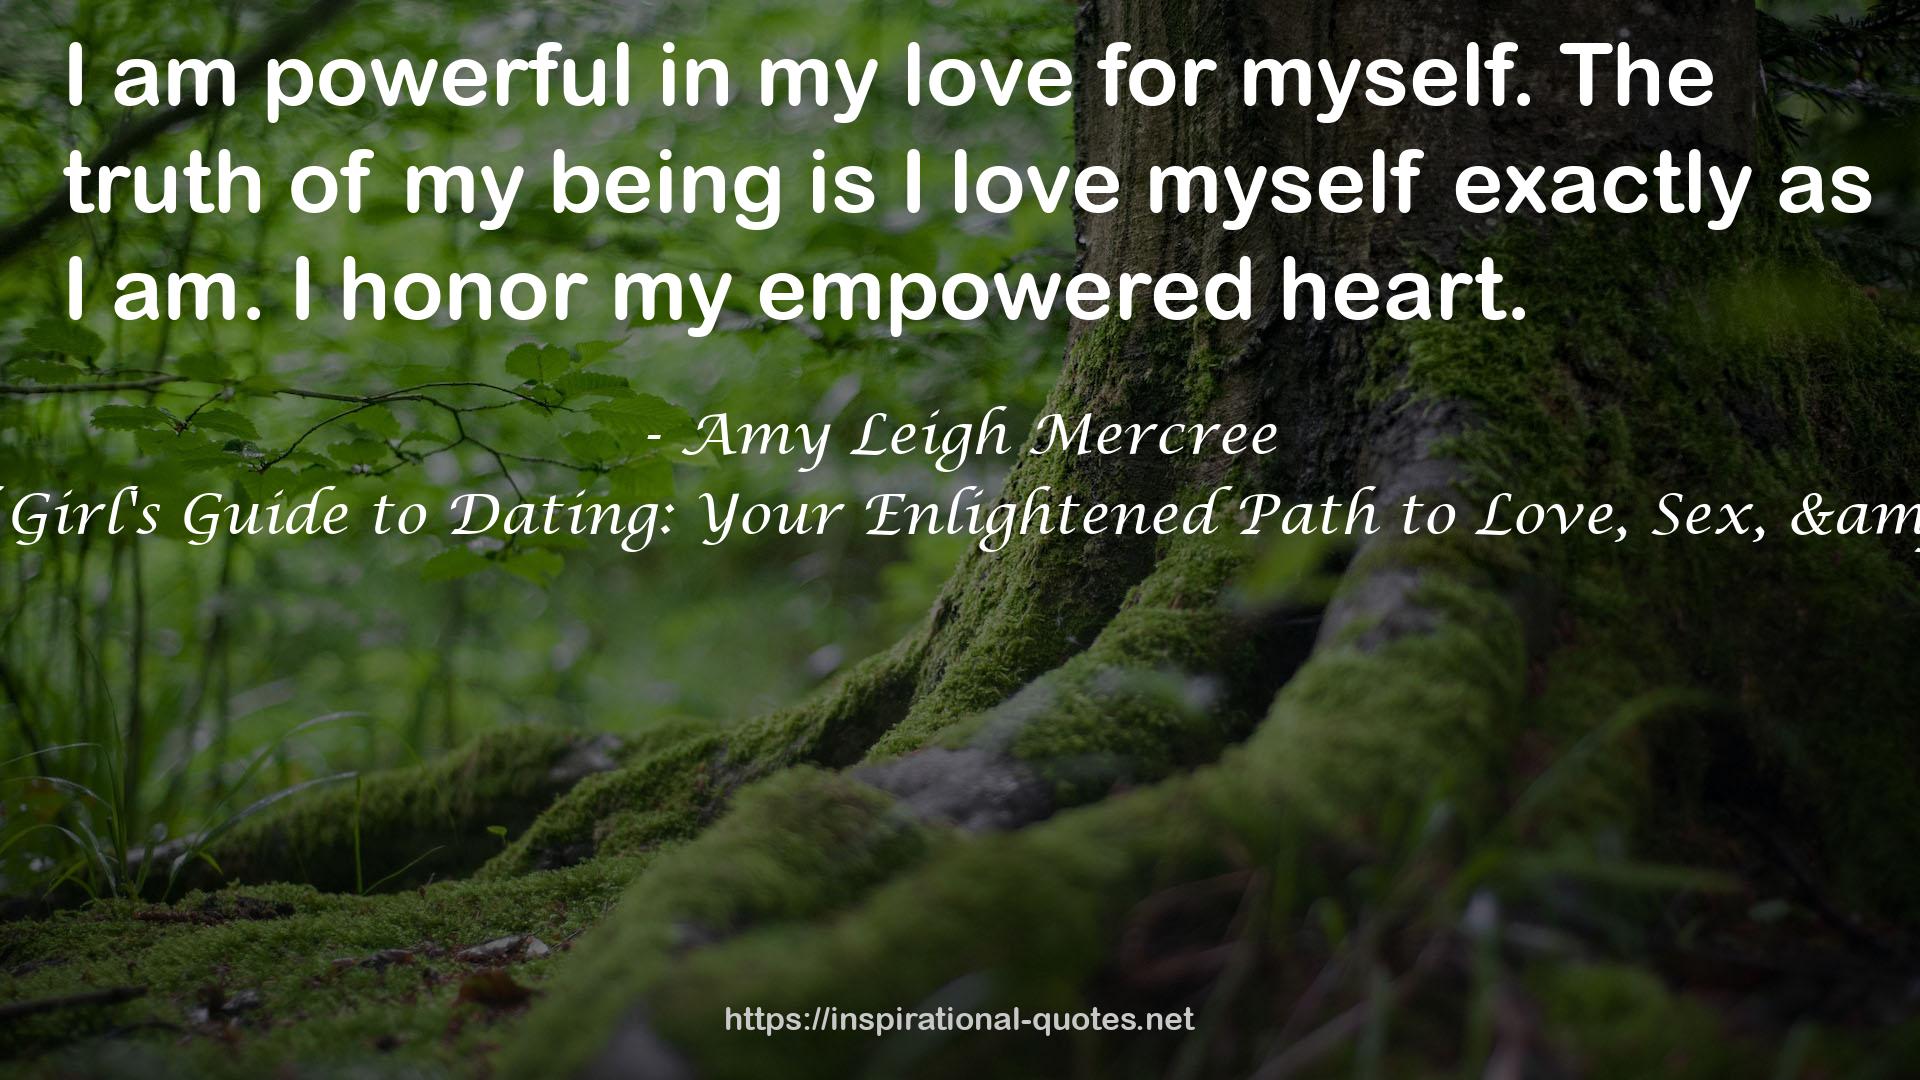 Amy Leigh Mercree QUOTES